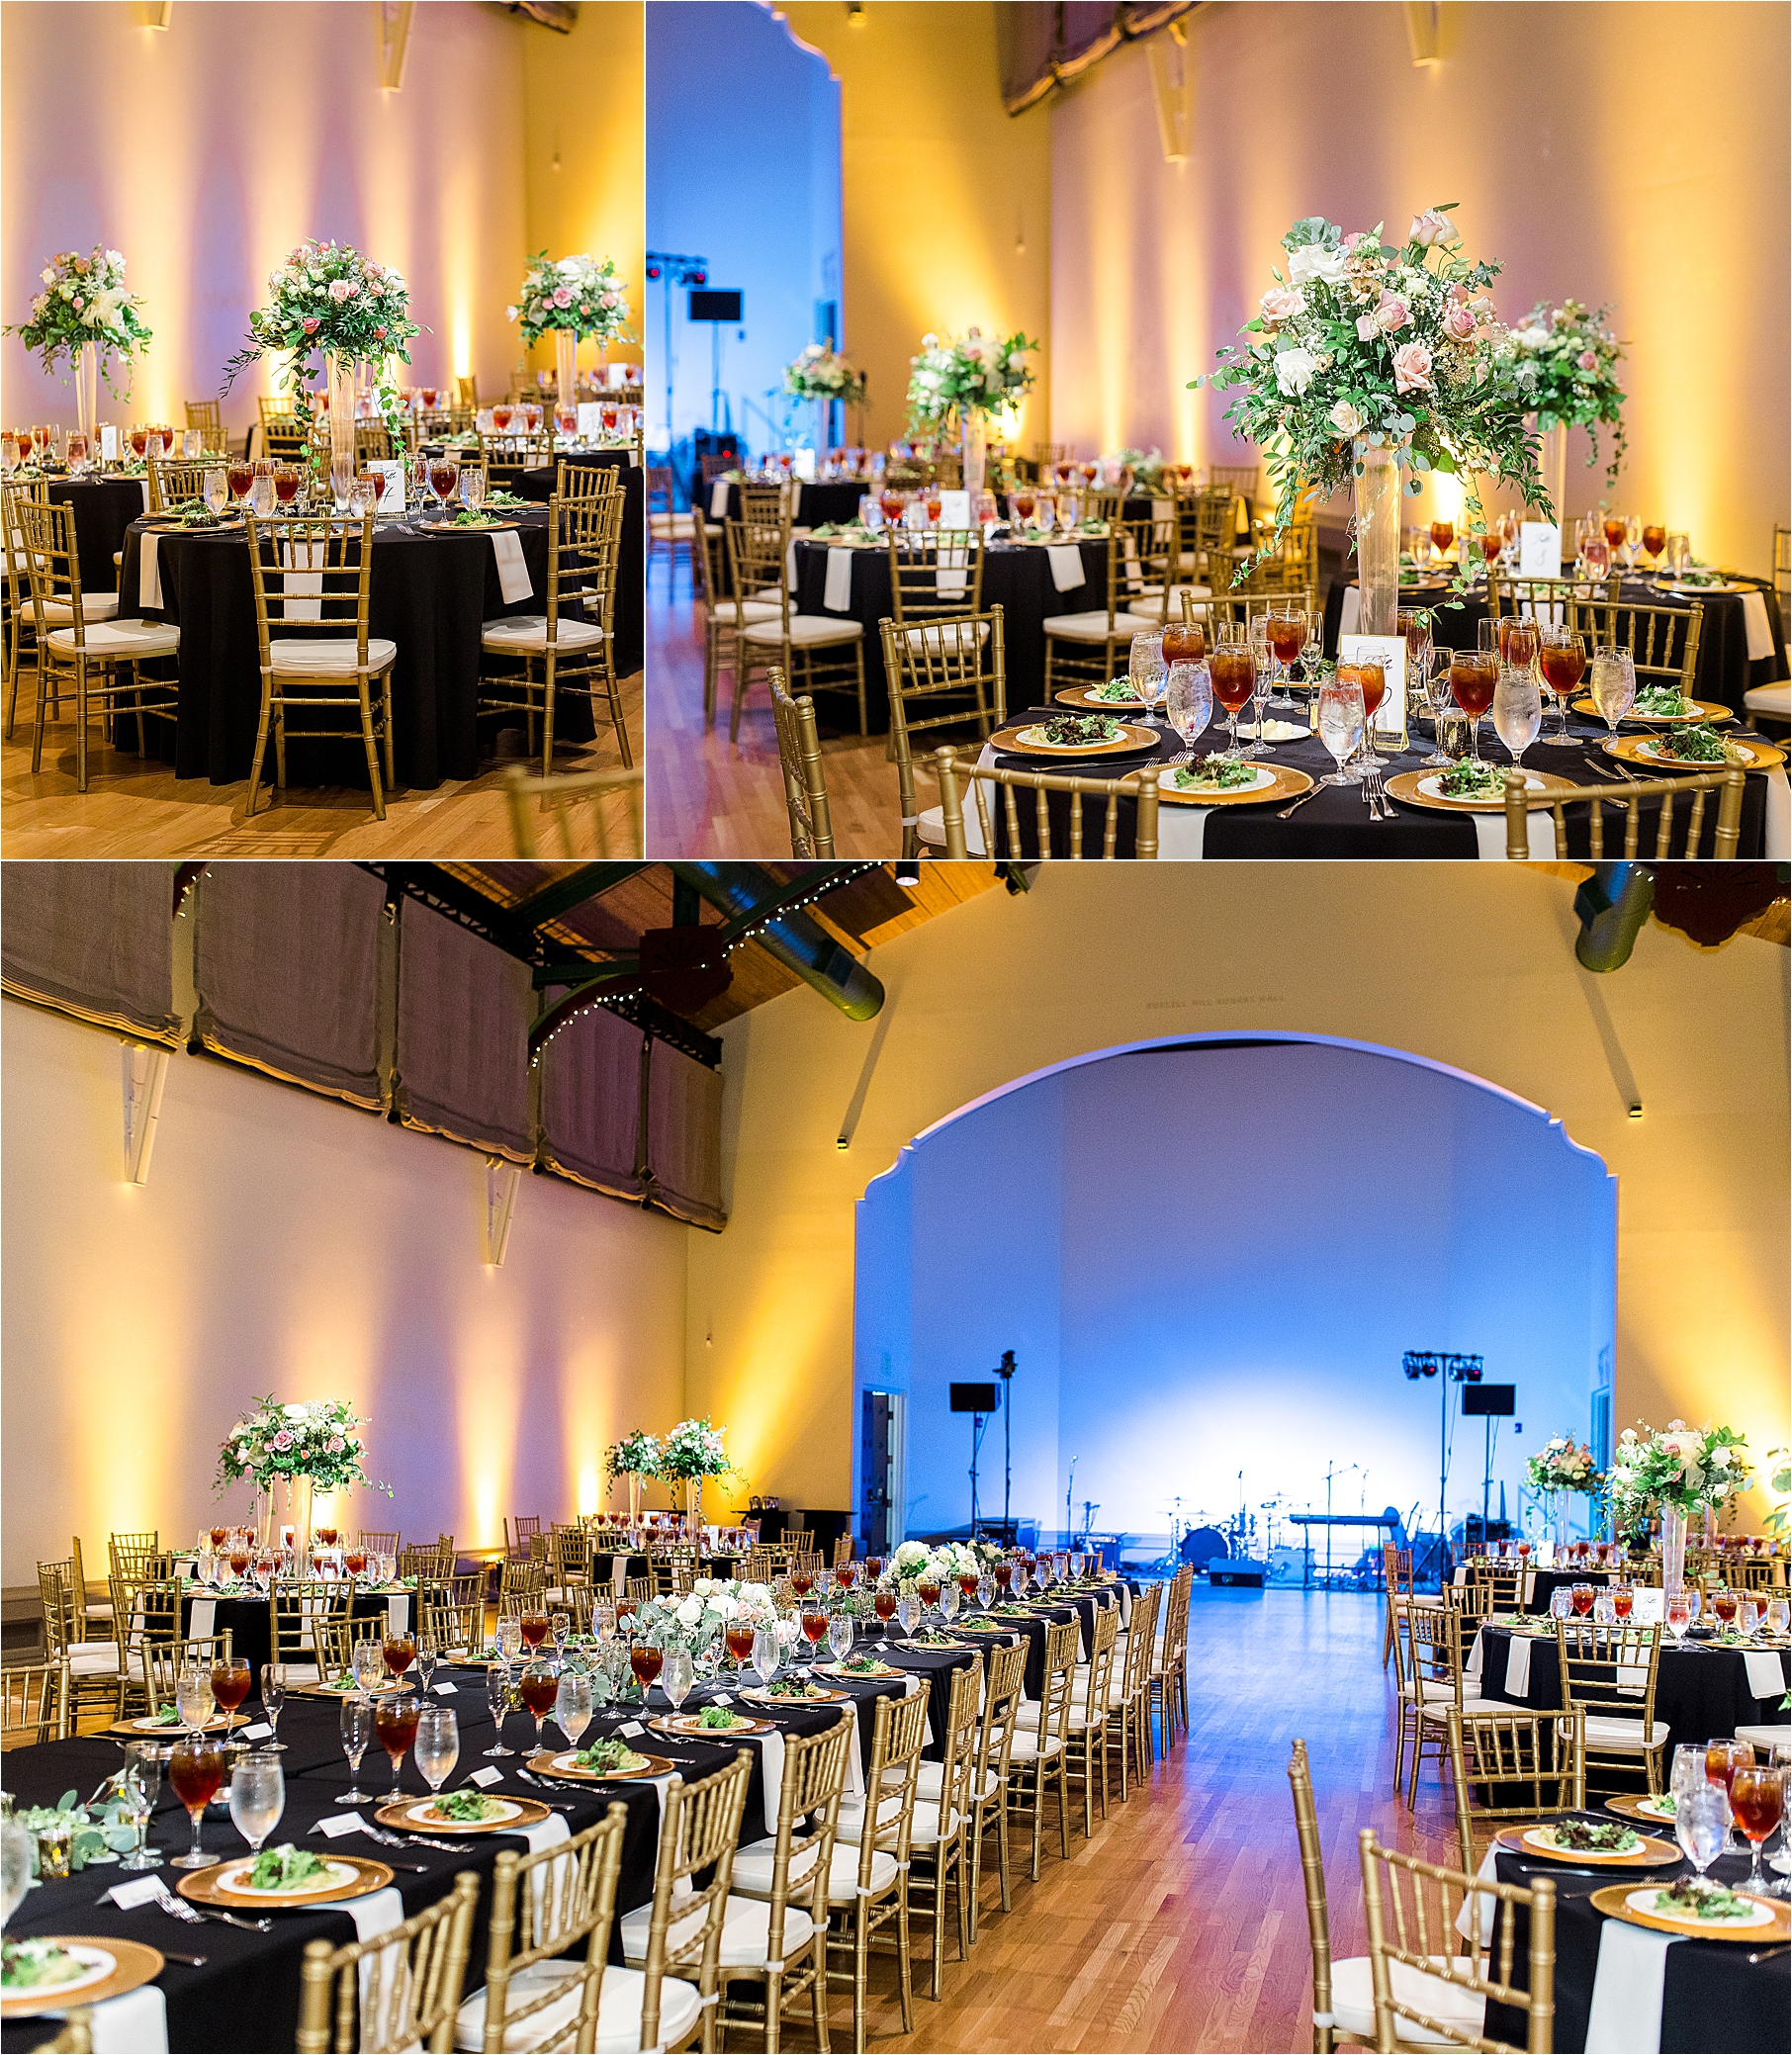 A wedding reception all set up at The McNay Art Museum by All in the details. It is adorned with lush florals and uplighting to set the mood. 